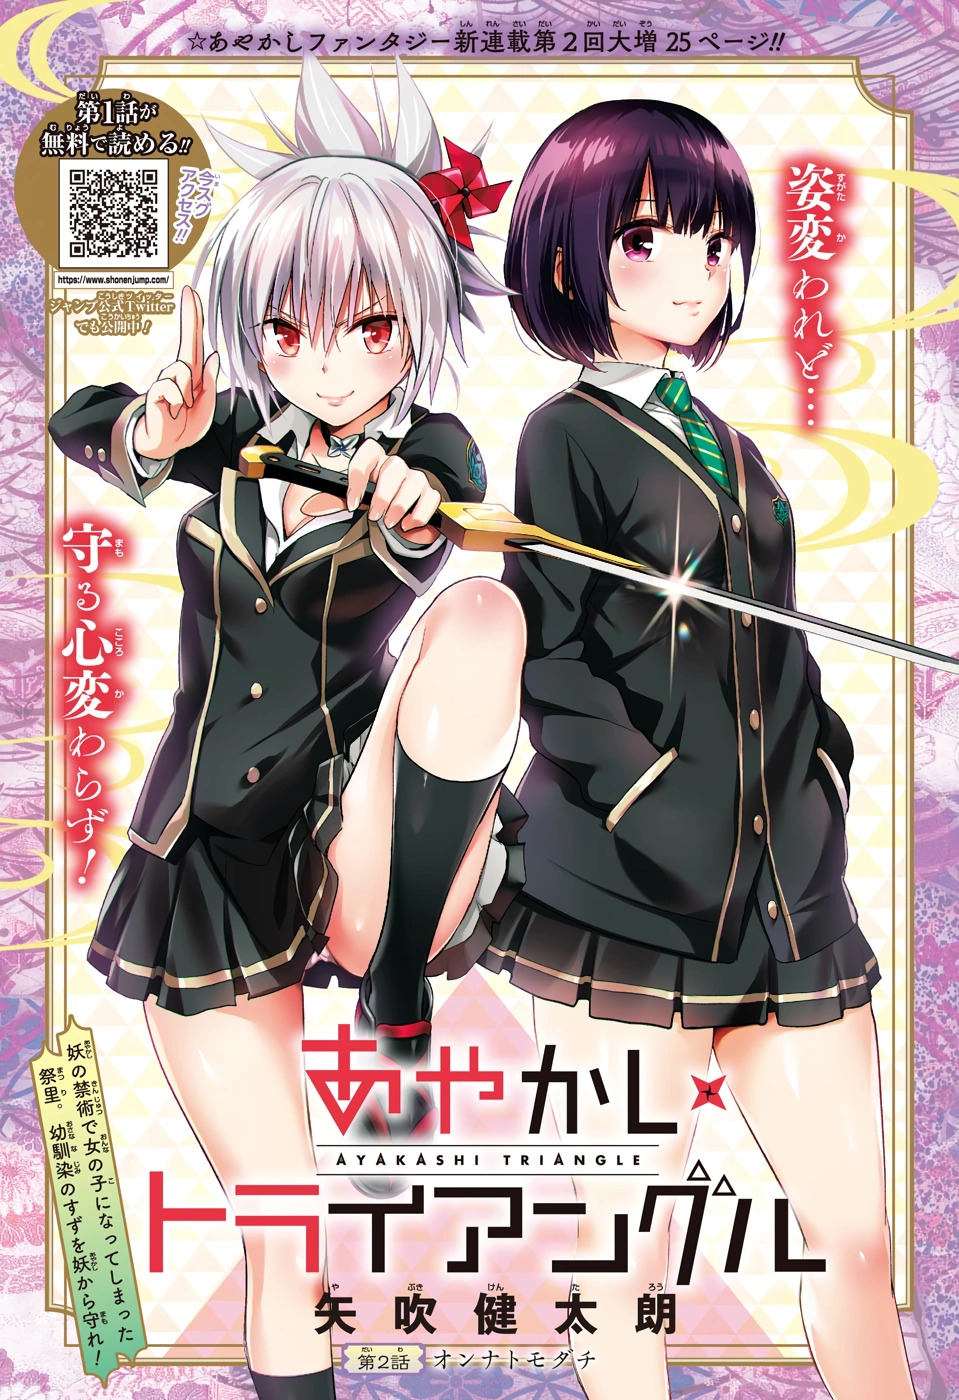 Shonen Jump on X: Ayakashi Triangle, Ch. 21 (Web-Only): Reverting back to  male gives Matsuri a fighting chance, but the battle is far from over! Read  it FREE from the official source!